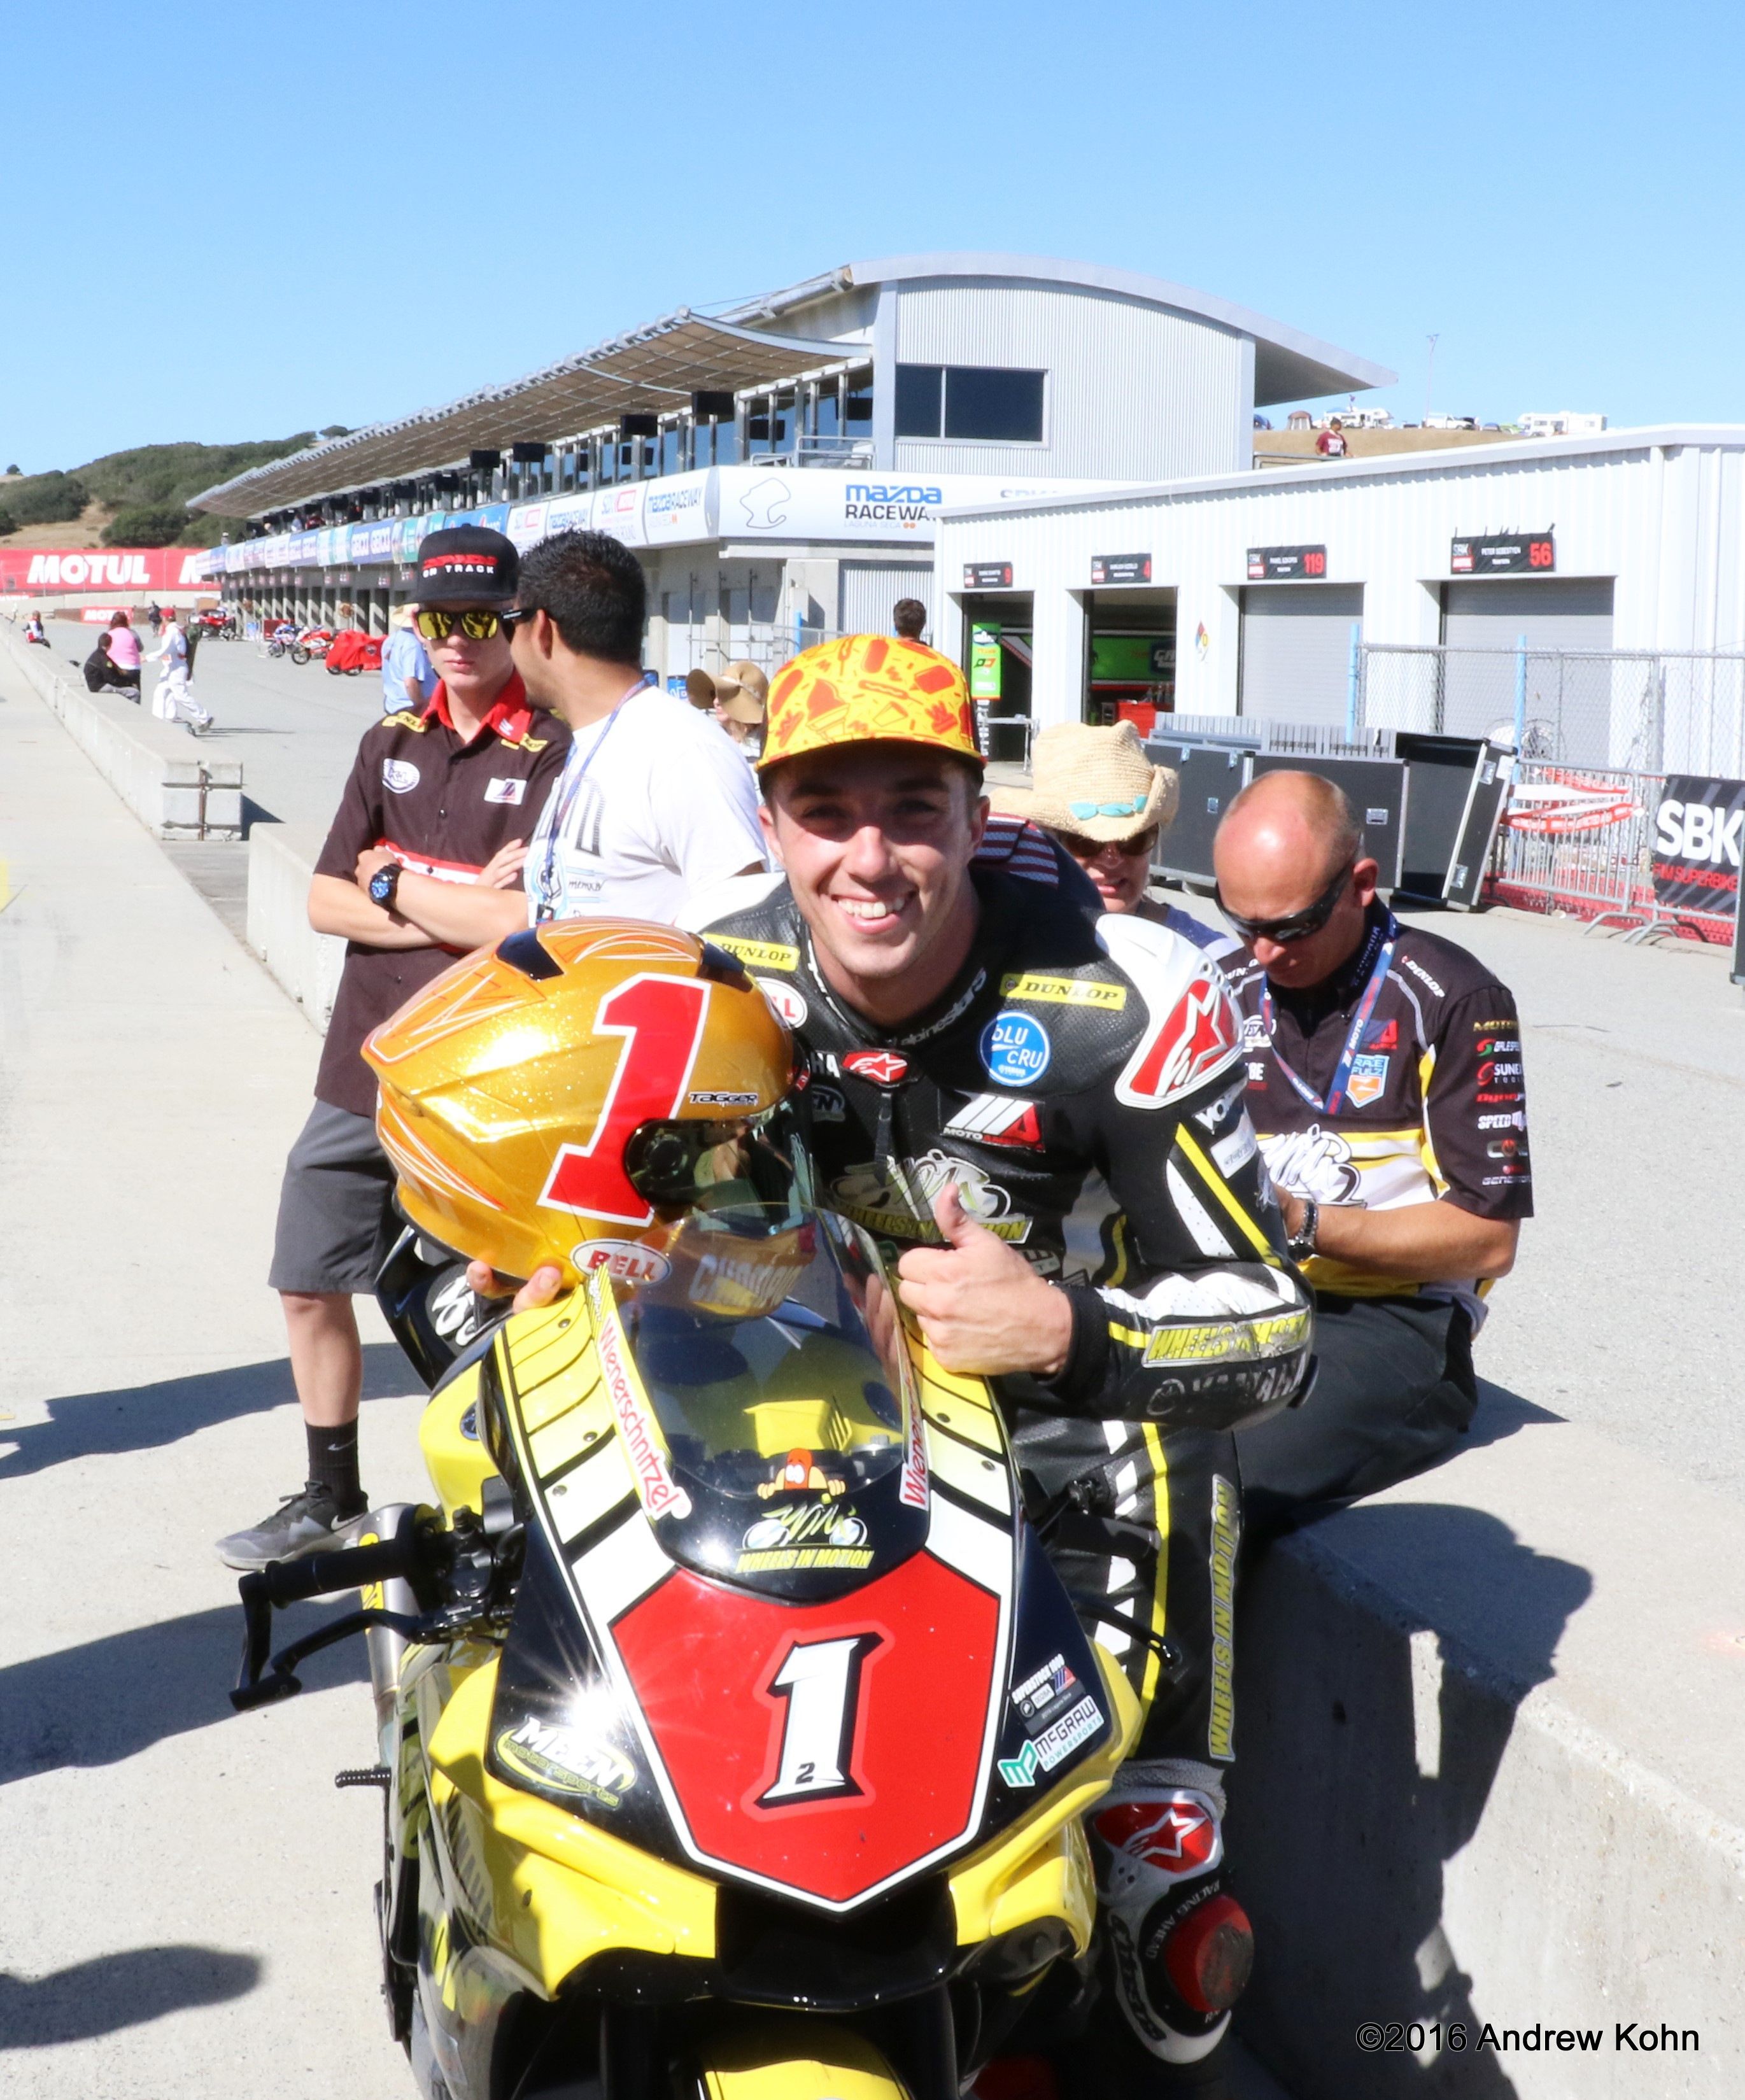 Josh Herrin wrapped up the 1000 Superstock title